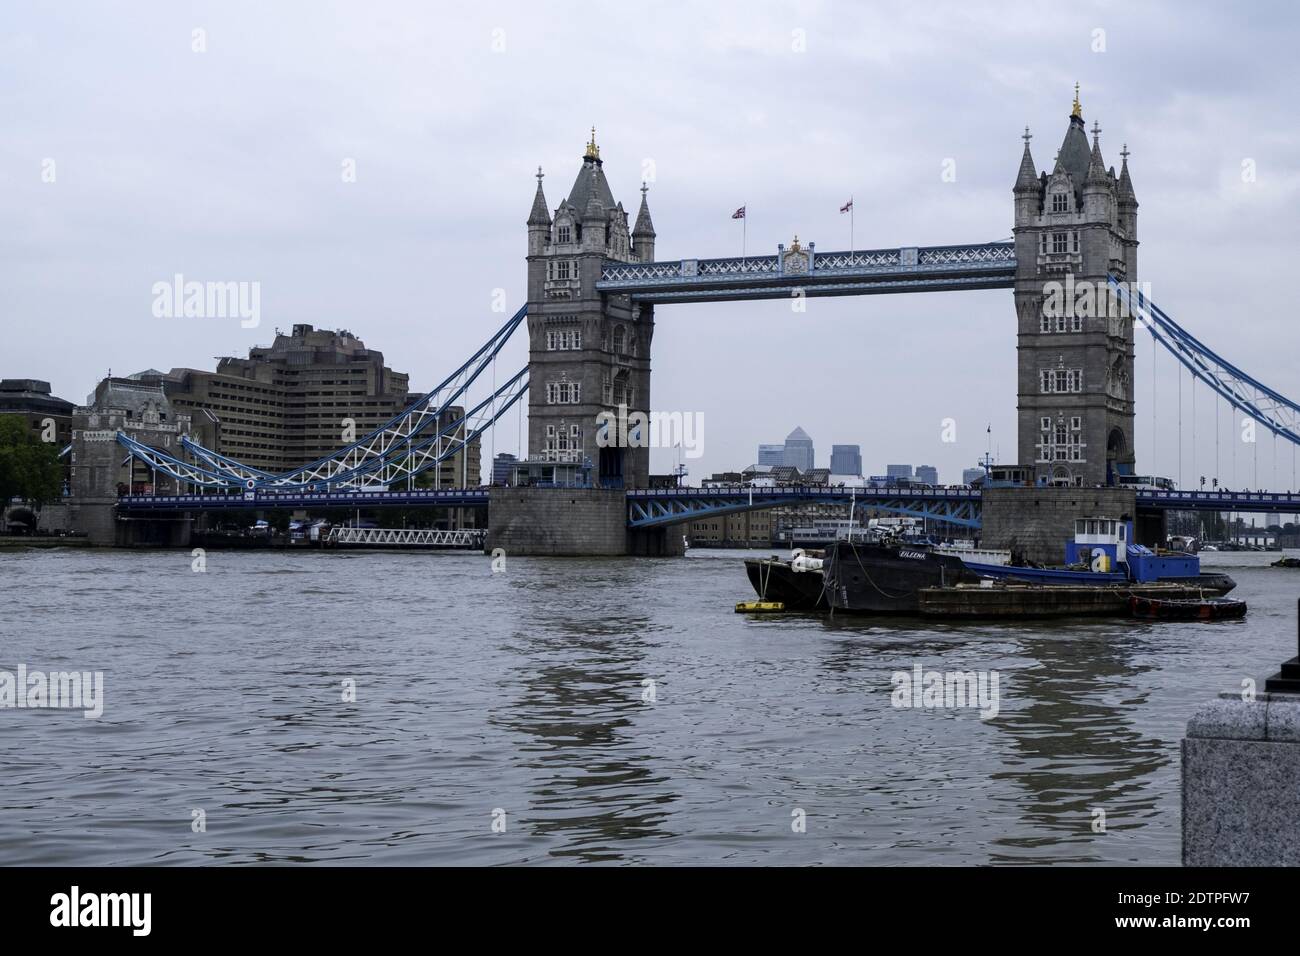 LONDON, UNITED KINGDOM - Aug 27, 2014: The wonderful Tower Bridge by Sir Horace Jones that crosses the Thames in London Stock Photo